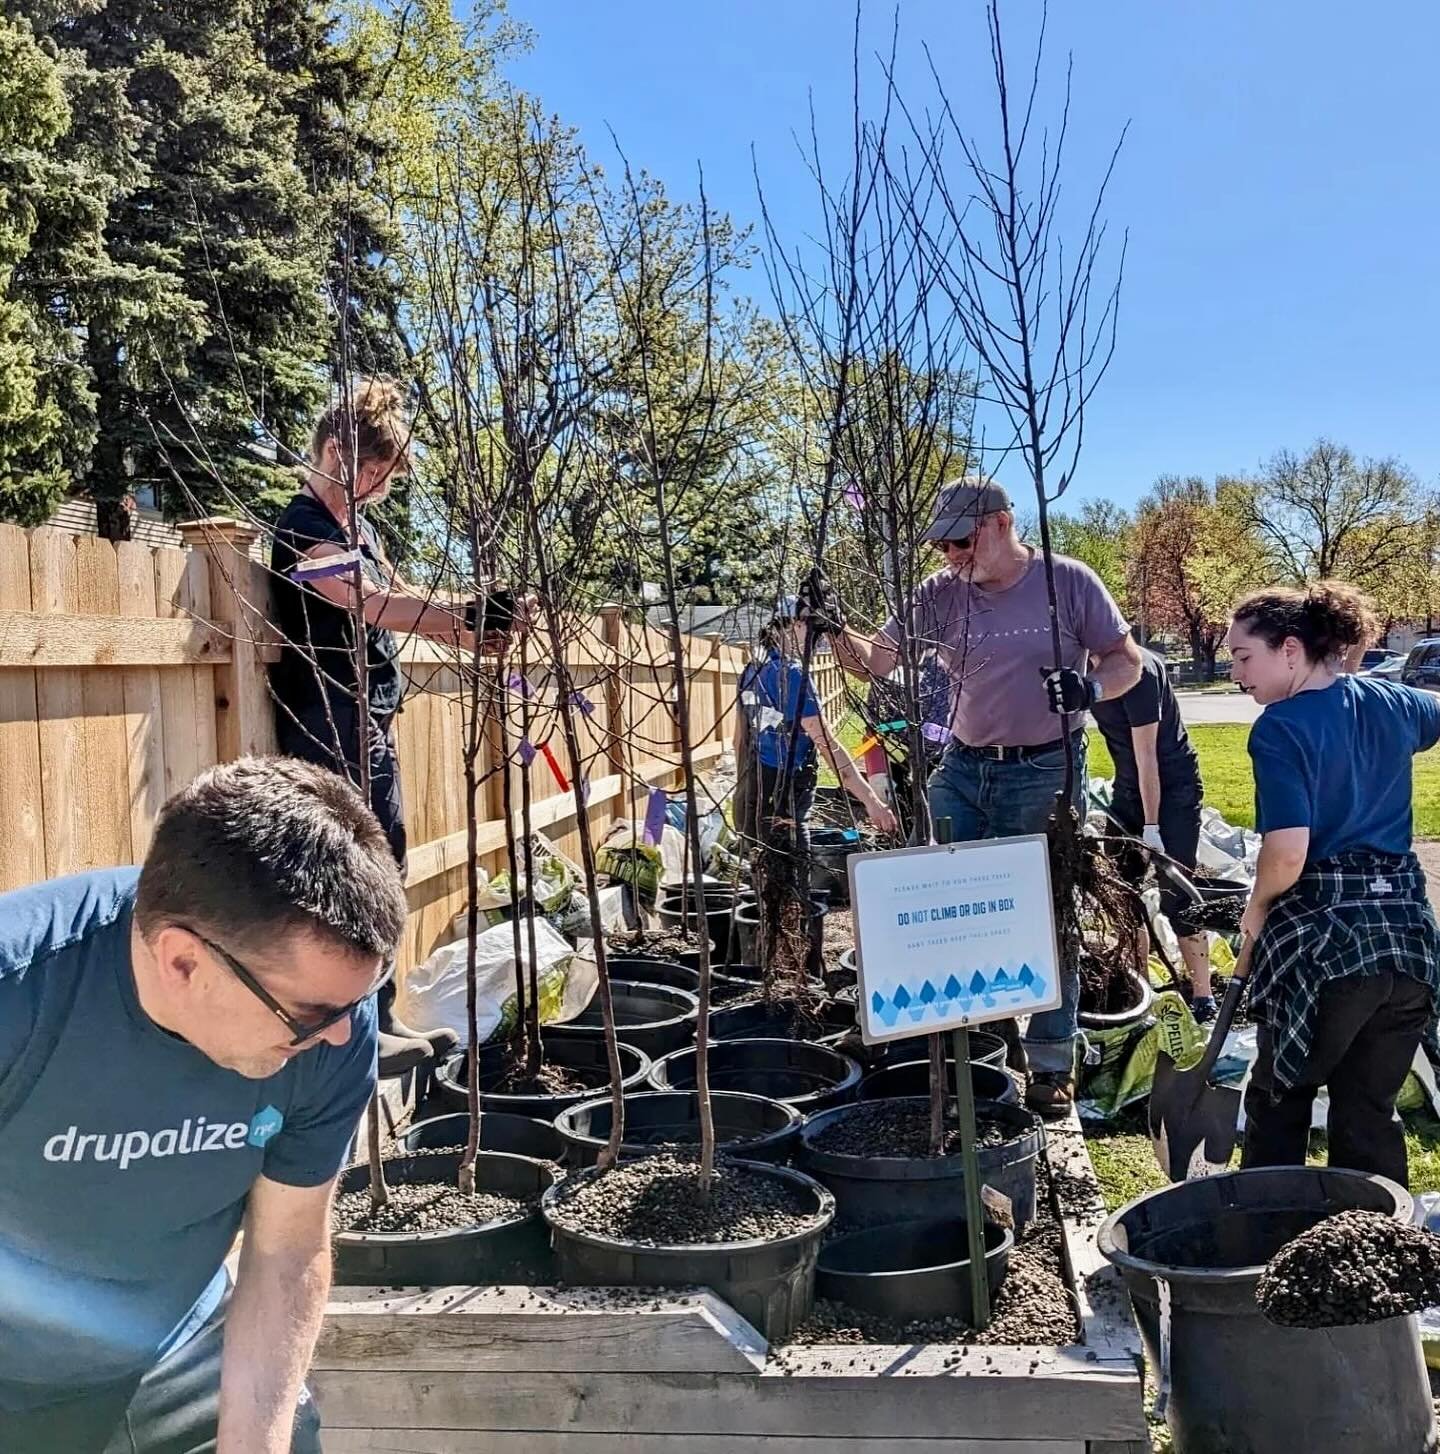 Weekend of establishing  #futureshade with a Sunday installation of #bareroottrees into the #hamlinemidwayenvironmentcommittee #gravelbed . At the end of the season these will get planted into yards in the #midwayneighborhood to combat the impact of 